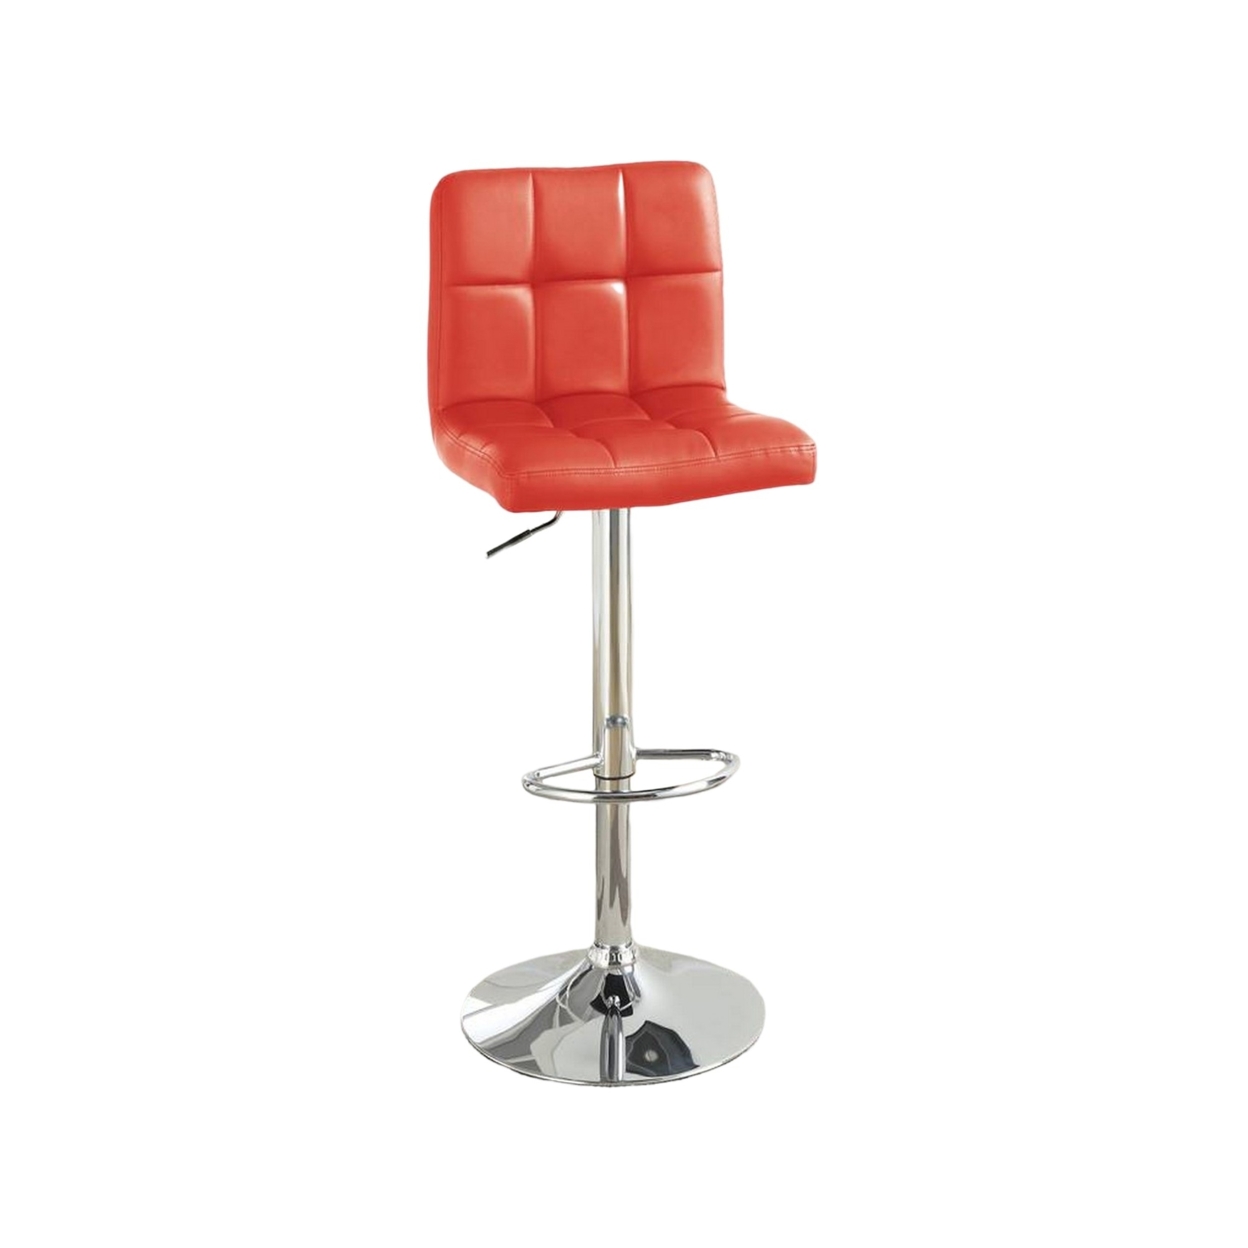 25-29 Inch Swivel Barstool, Set Of 2, Cushioned Seat, Red Faux Leather